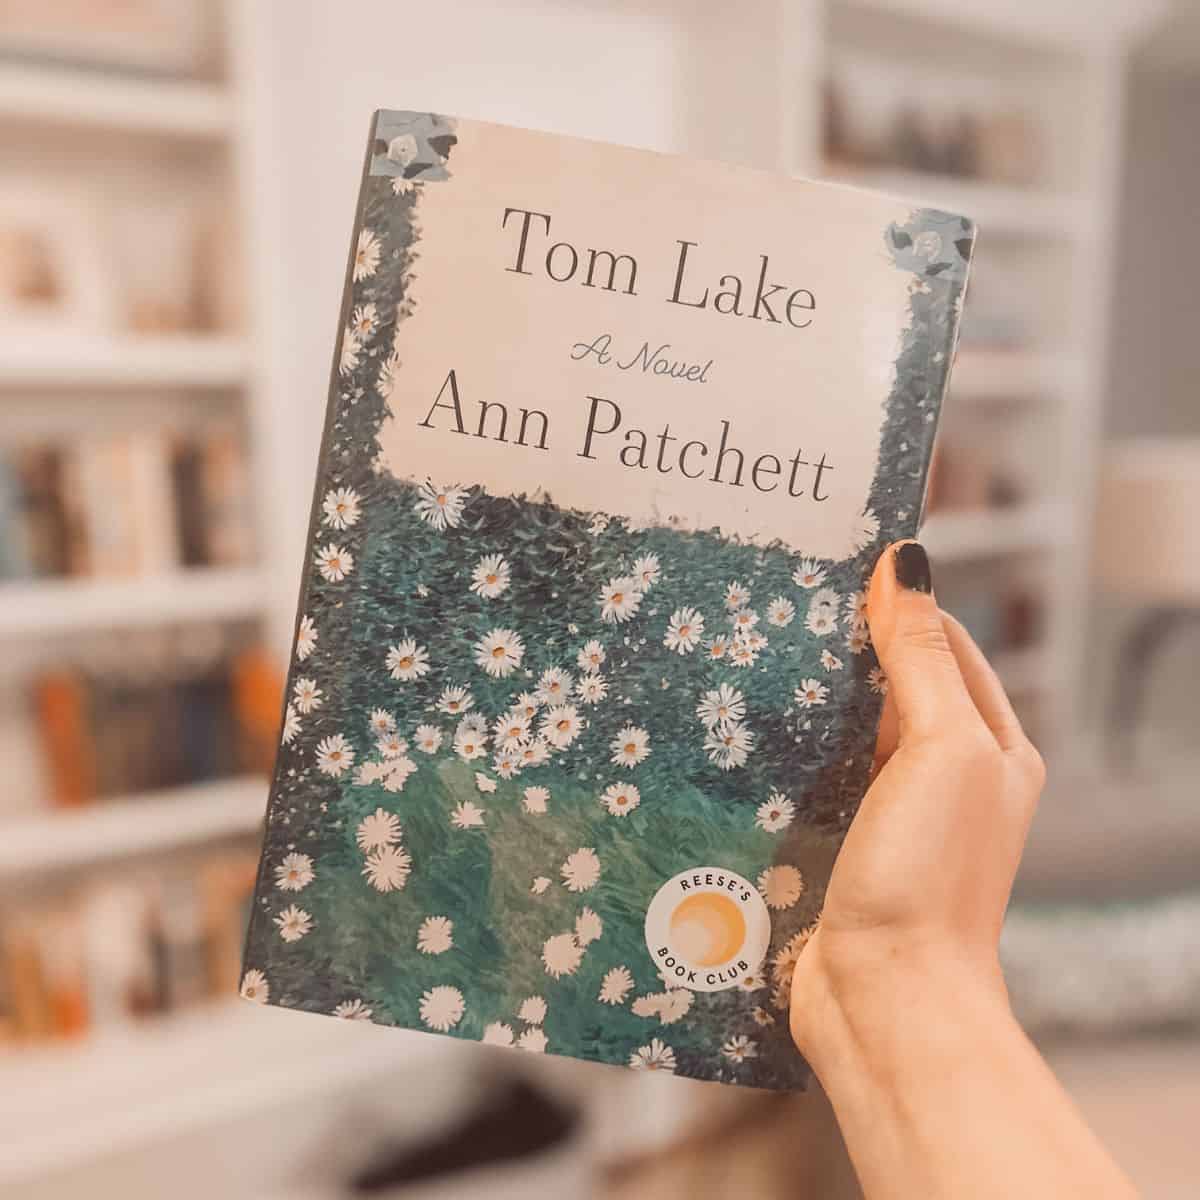 tom lake by ann patchett held up in a reading room.